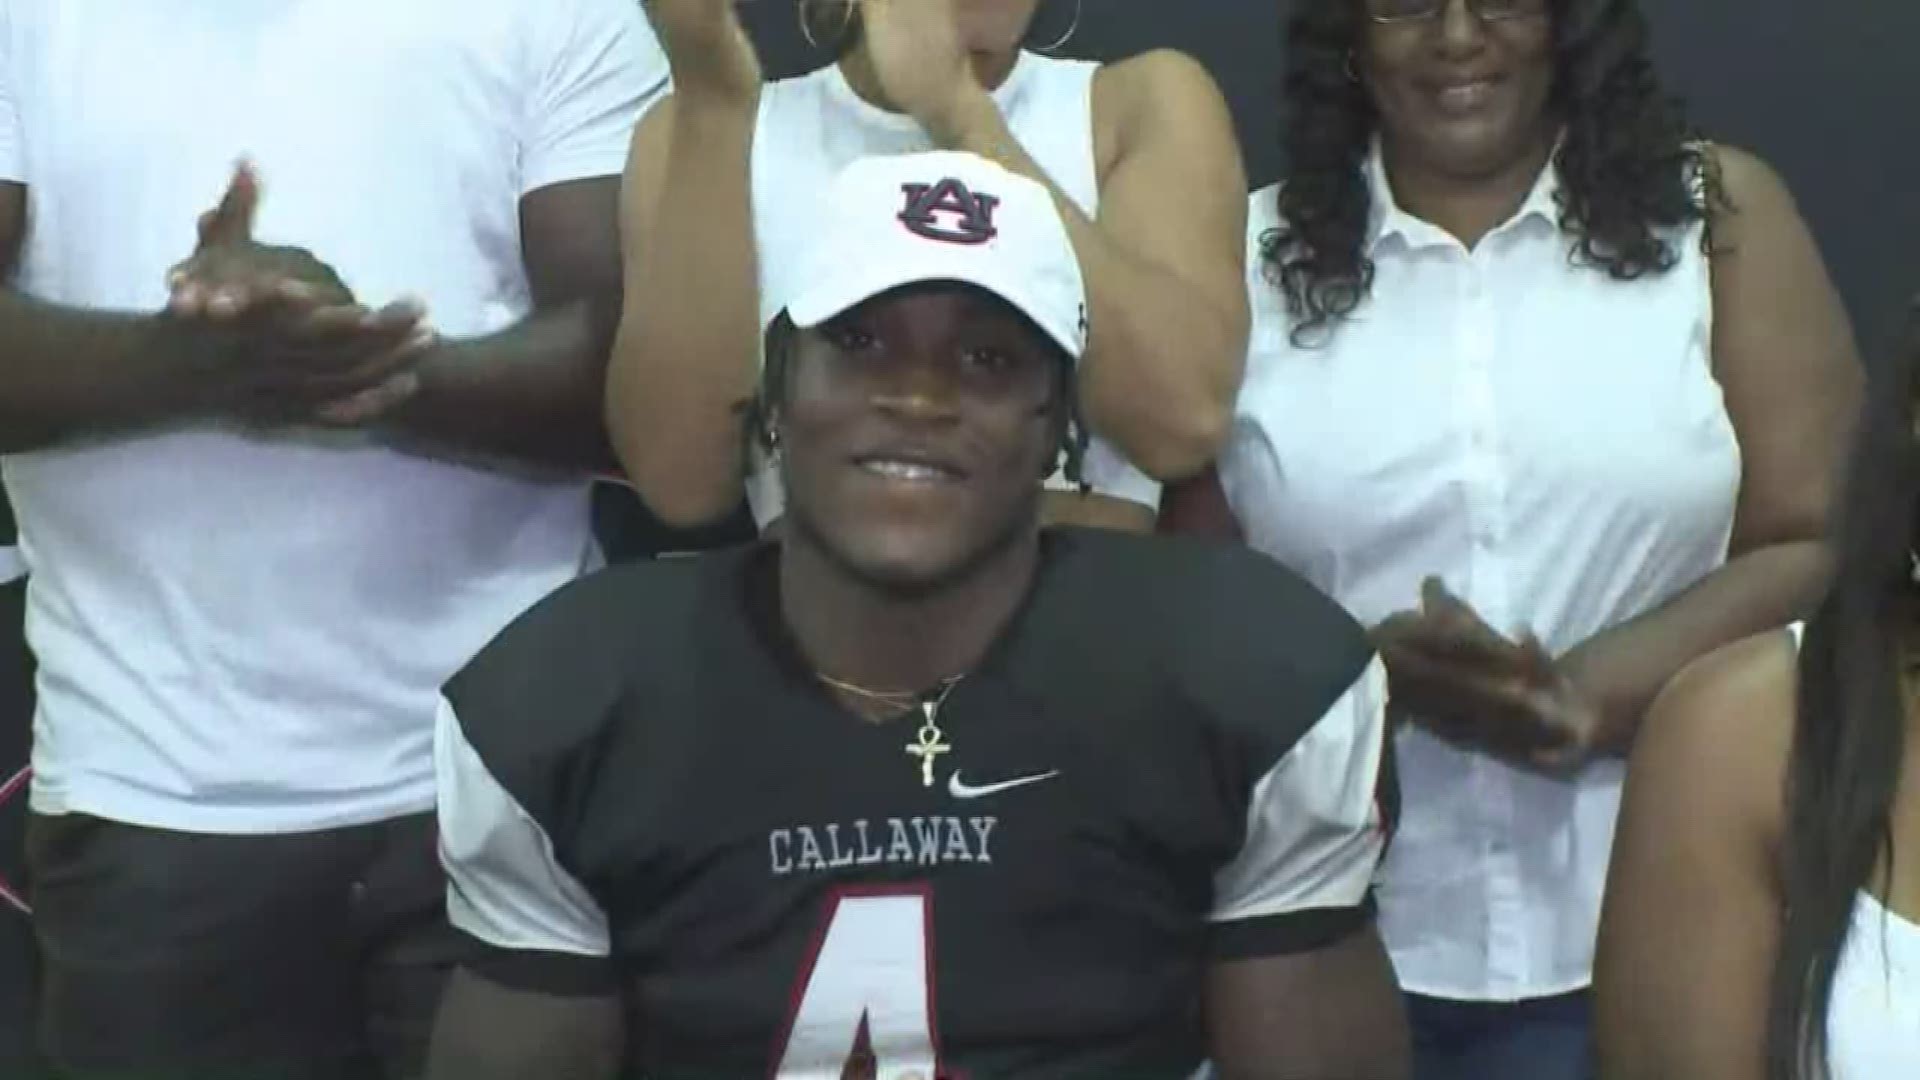 Callaway High School's Cartavious "Tank" Bigsby, a 4-star running back, picked Auburn University during a ceremony at the school on Friday, Aug. 9.